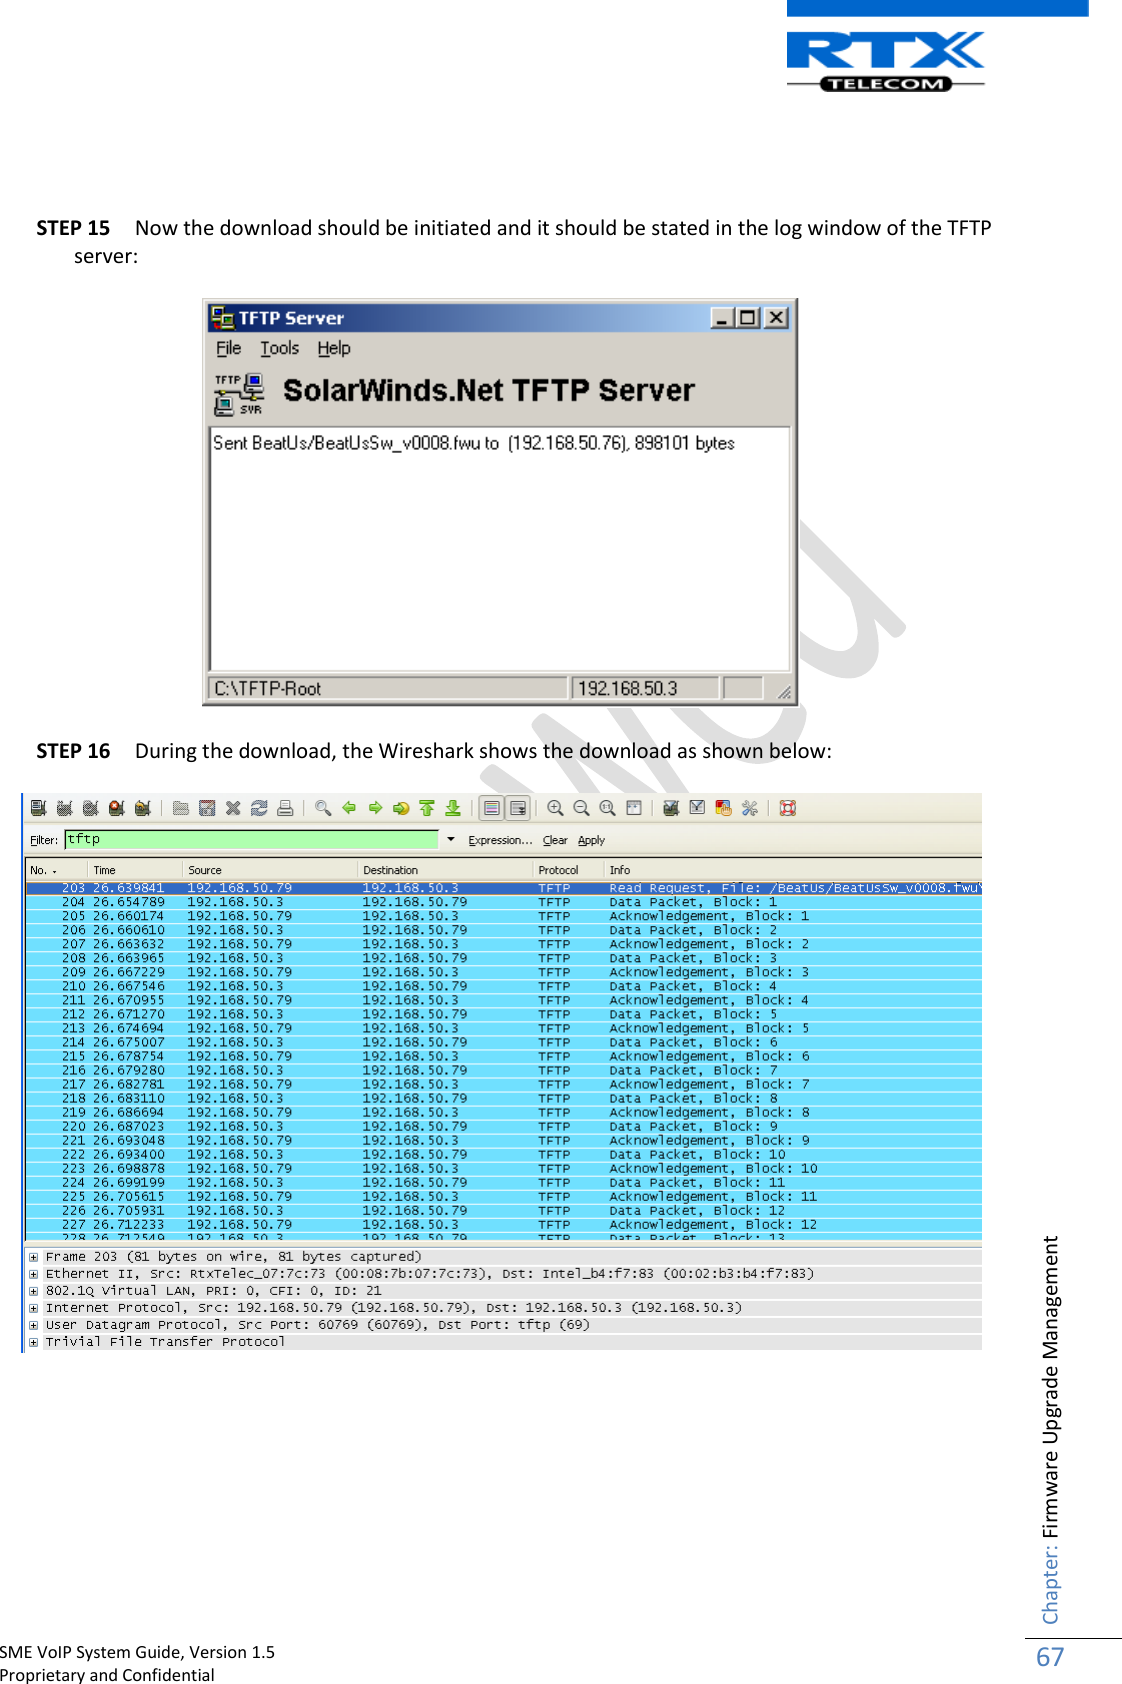    SME VoIP System Guide, Version 1.5                                                                                                                                                          Proprietary and Confidential    Chapter: Firmware Upgrade Management 67    STEP 15 Now the download should be initiated and it should be stated in the log window of the TFTP server:  STEP 16 During the download, the Wireshark shows the download as shown below:       